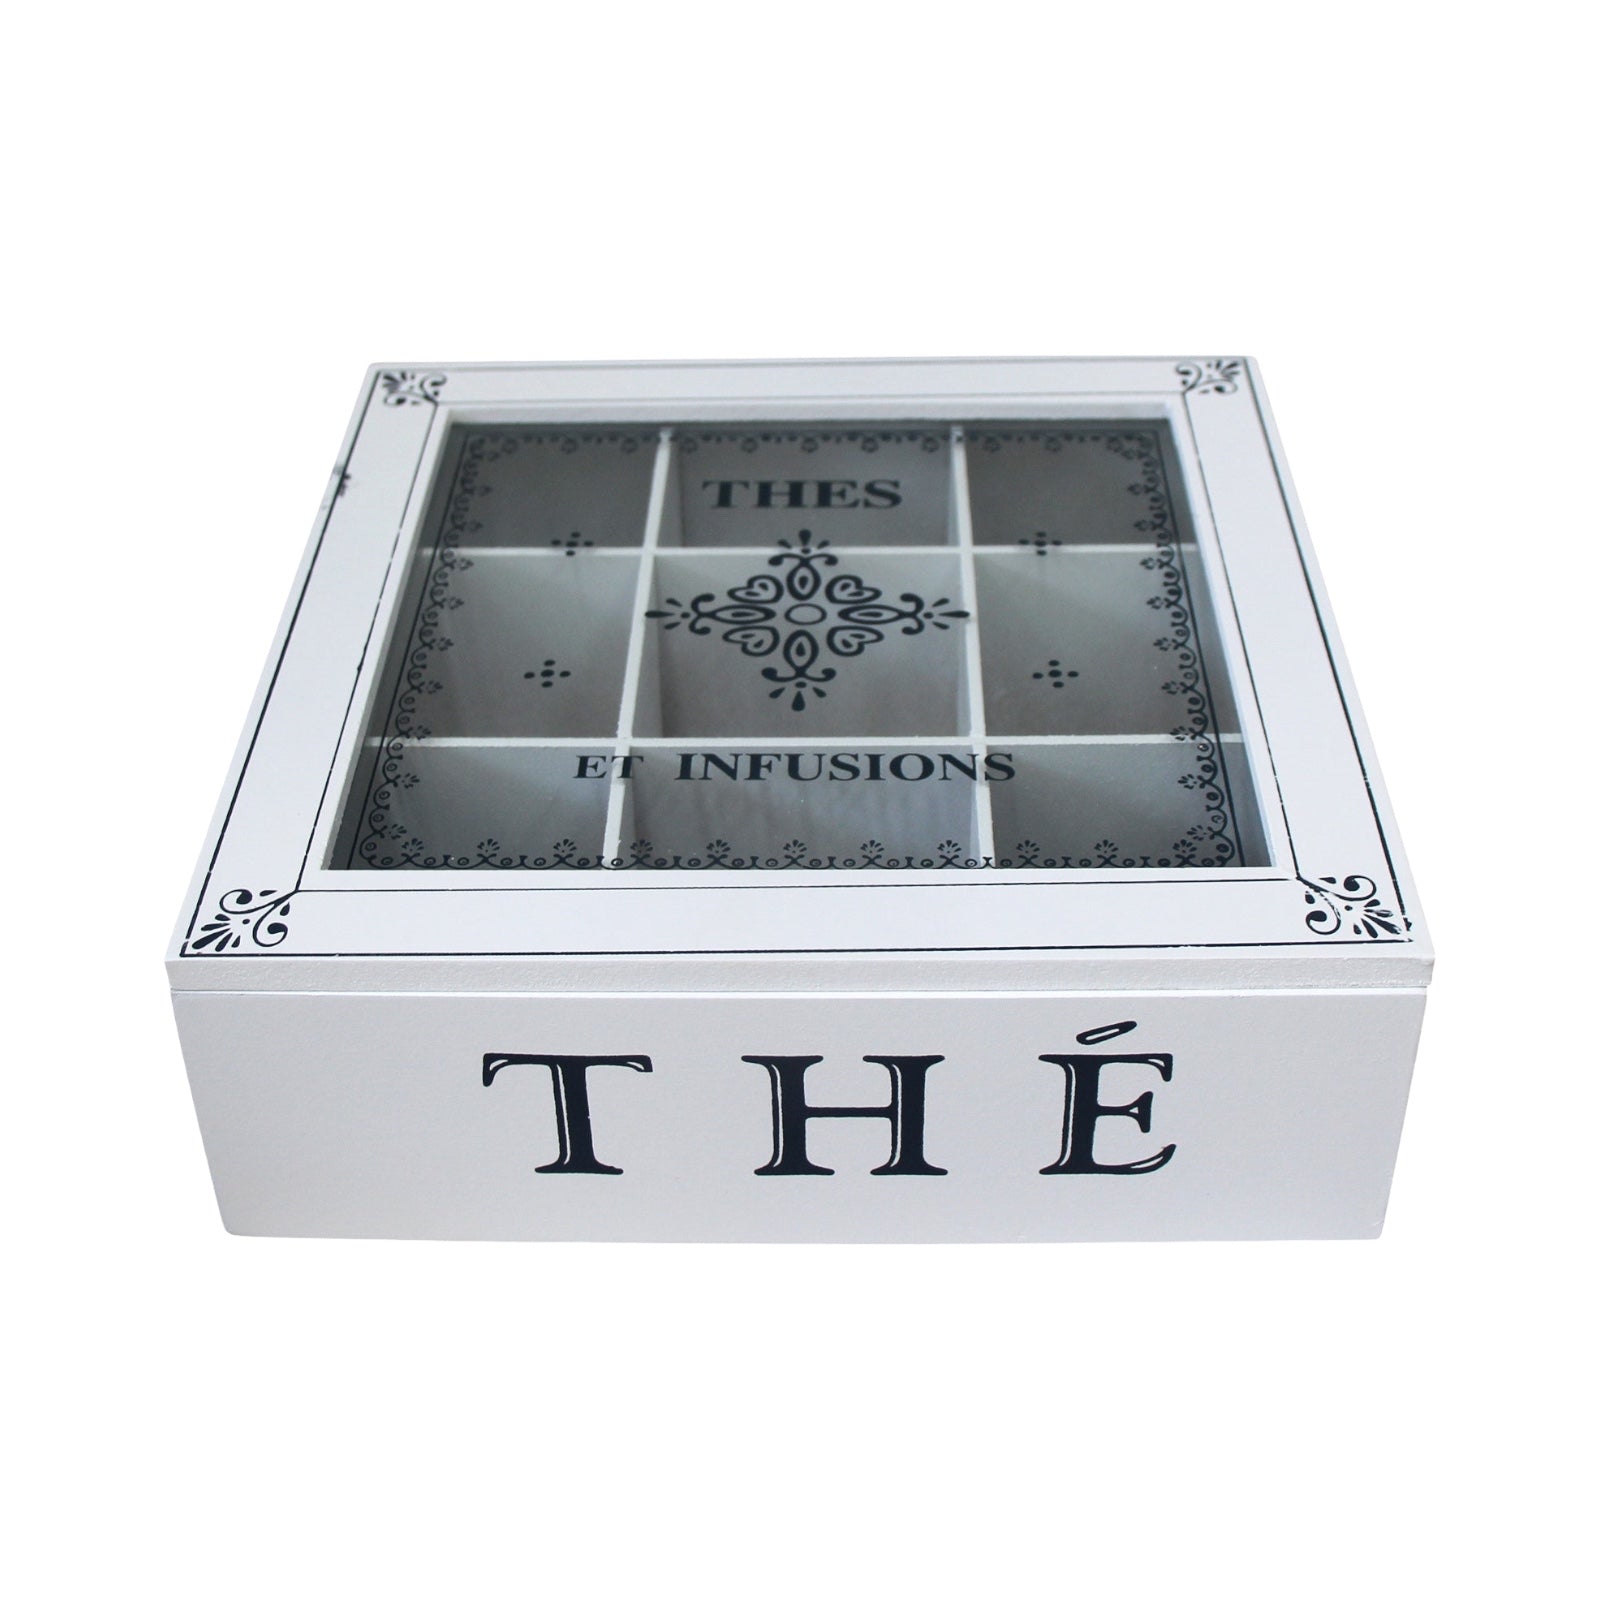 Tea Box Infusions Large French Provincial - The Renmy Store Homewares & Gifts 